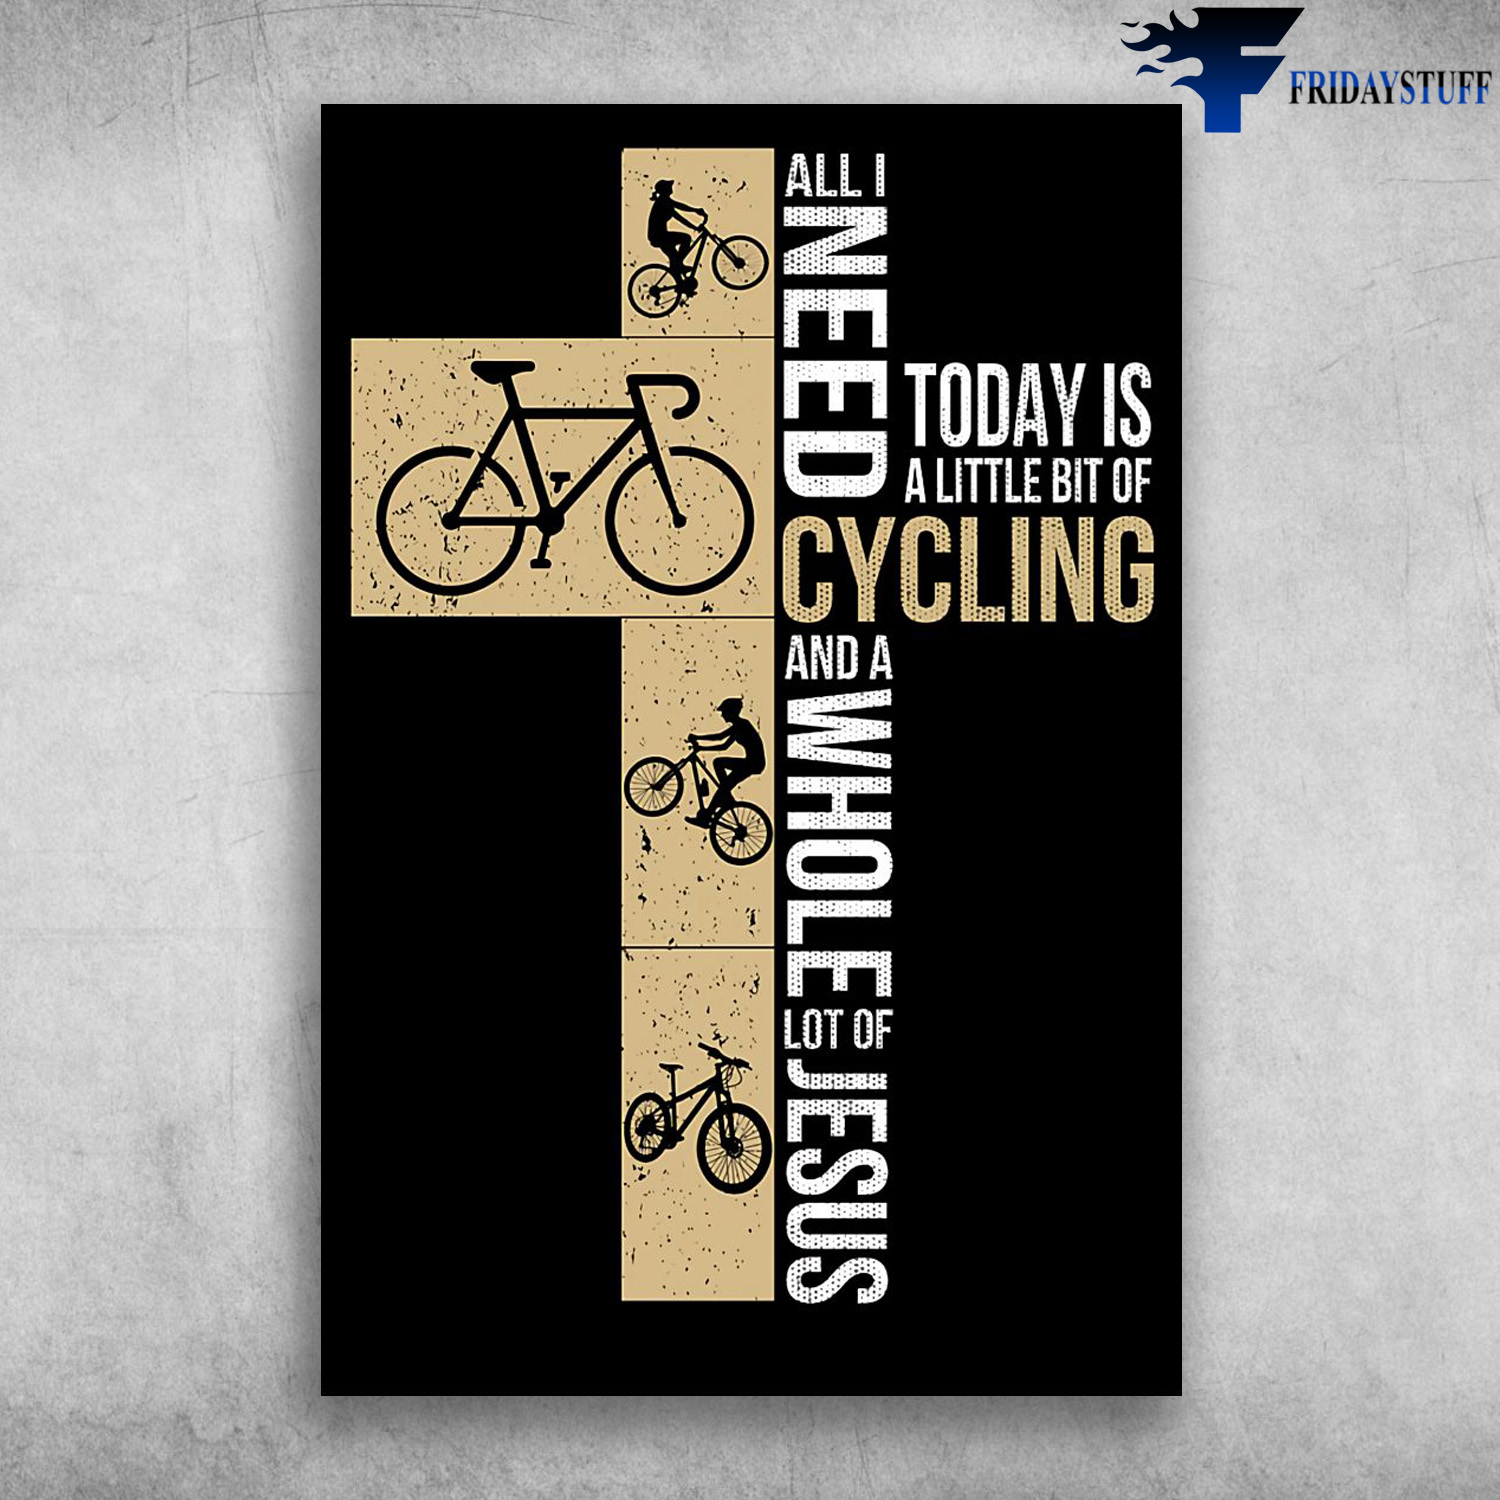 Cycling In The Cross- Al I Need Oday Is A Little Bit Of Cycling, And A Whole Lot Of Jesus